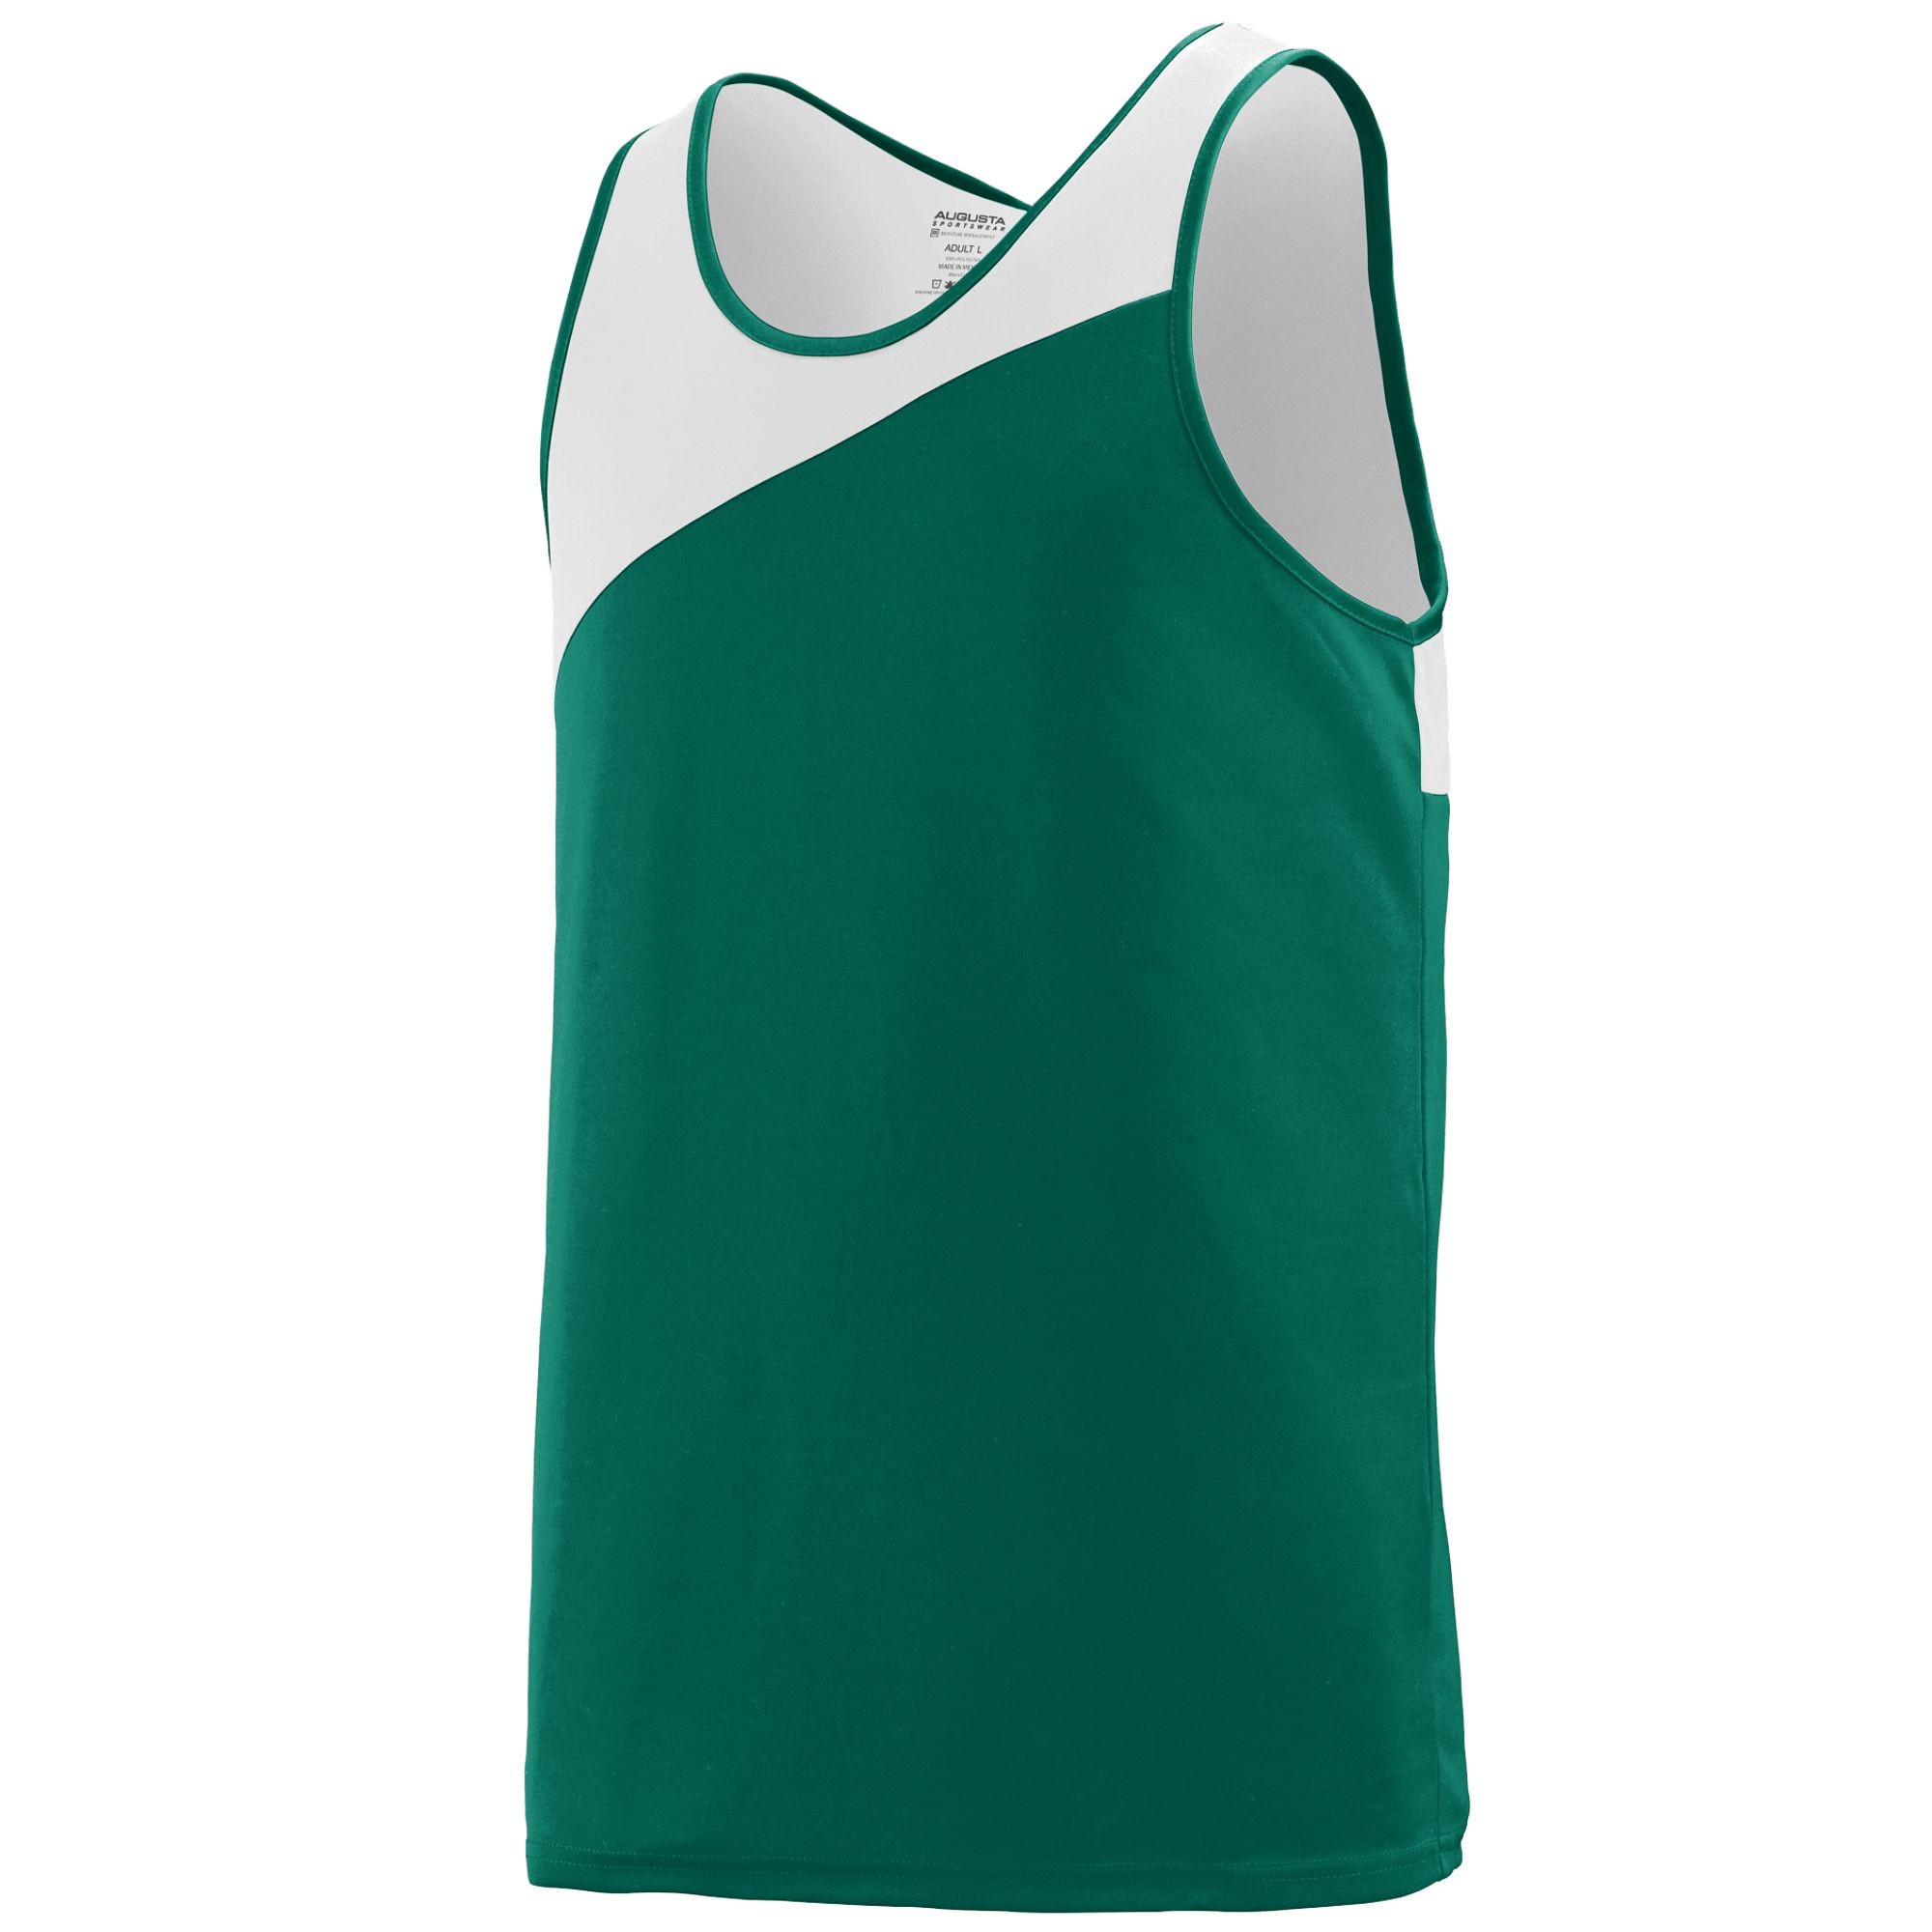 Augusta Accelerate Jersey - Mens/Youth